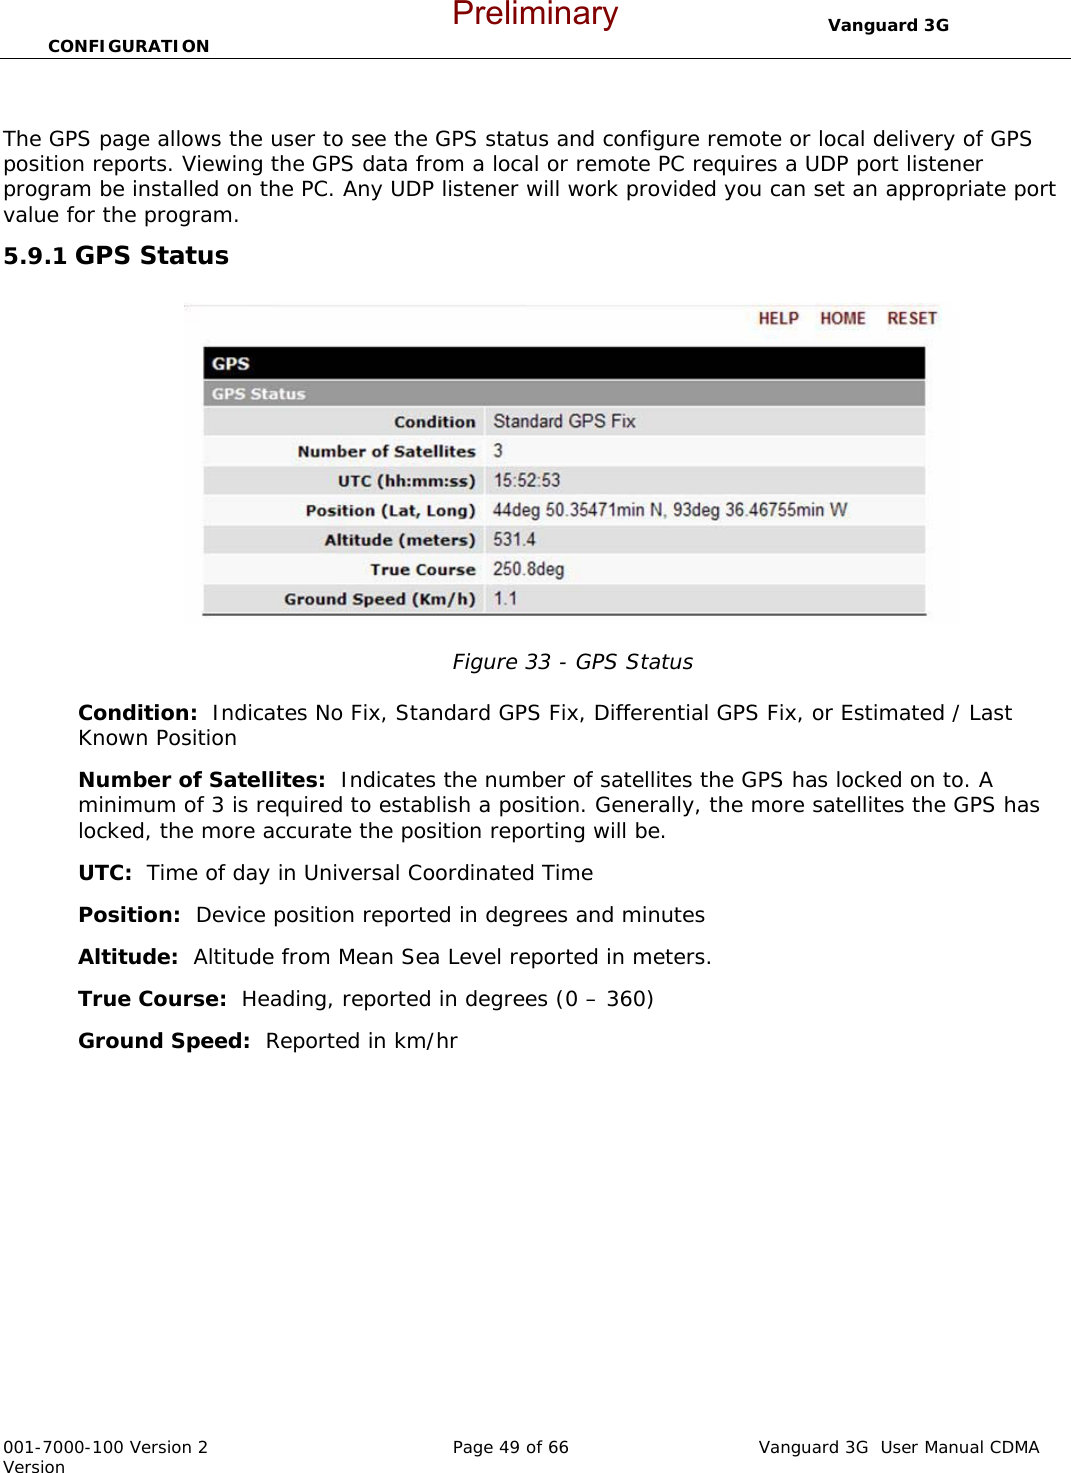                                  Vanguard 3G  CONFIGURATION  001-7000-100 Version 2       Page 49 of 66       Vanguard 3G  User Manual CDMA Version   The GPS page allows the user to see the GPS status and configure remote or local delivery of GPS position reports. Viewing the GPS data from a local or remote PC requires a UDP port listener program be installed on the PC. Any UDP listener will work provided you can set an appropriate port value for the program.   5.9.1 GPS Status  Figure 33 - GPS Status  Condition:  Indicates No Fix, Standard GPS Fix, Differential GPS Fix, or Estimated / Last Known Position Number of Satellites:  Indicates the number of satellites the GPS has locked on to. A minimum of 3 is required to establish a position. Generally, the more satellites the GPS has locked, the more accurate the position reporting will be.  UTC:  Time of day in Universal Coordinated Time Position:  Device position reported in degrees and minutes Altitude:  Altitude from Mean Sea Level reported in meters.   True Course:  Heading, reported in degrees (0 – 360) Ground Speed:  Reported in km/hr Preliminary